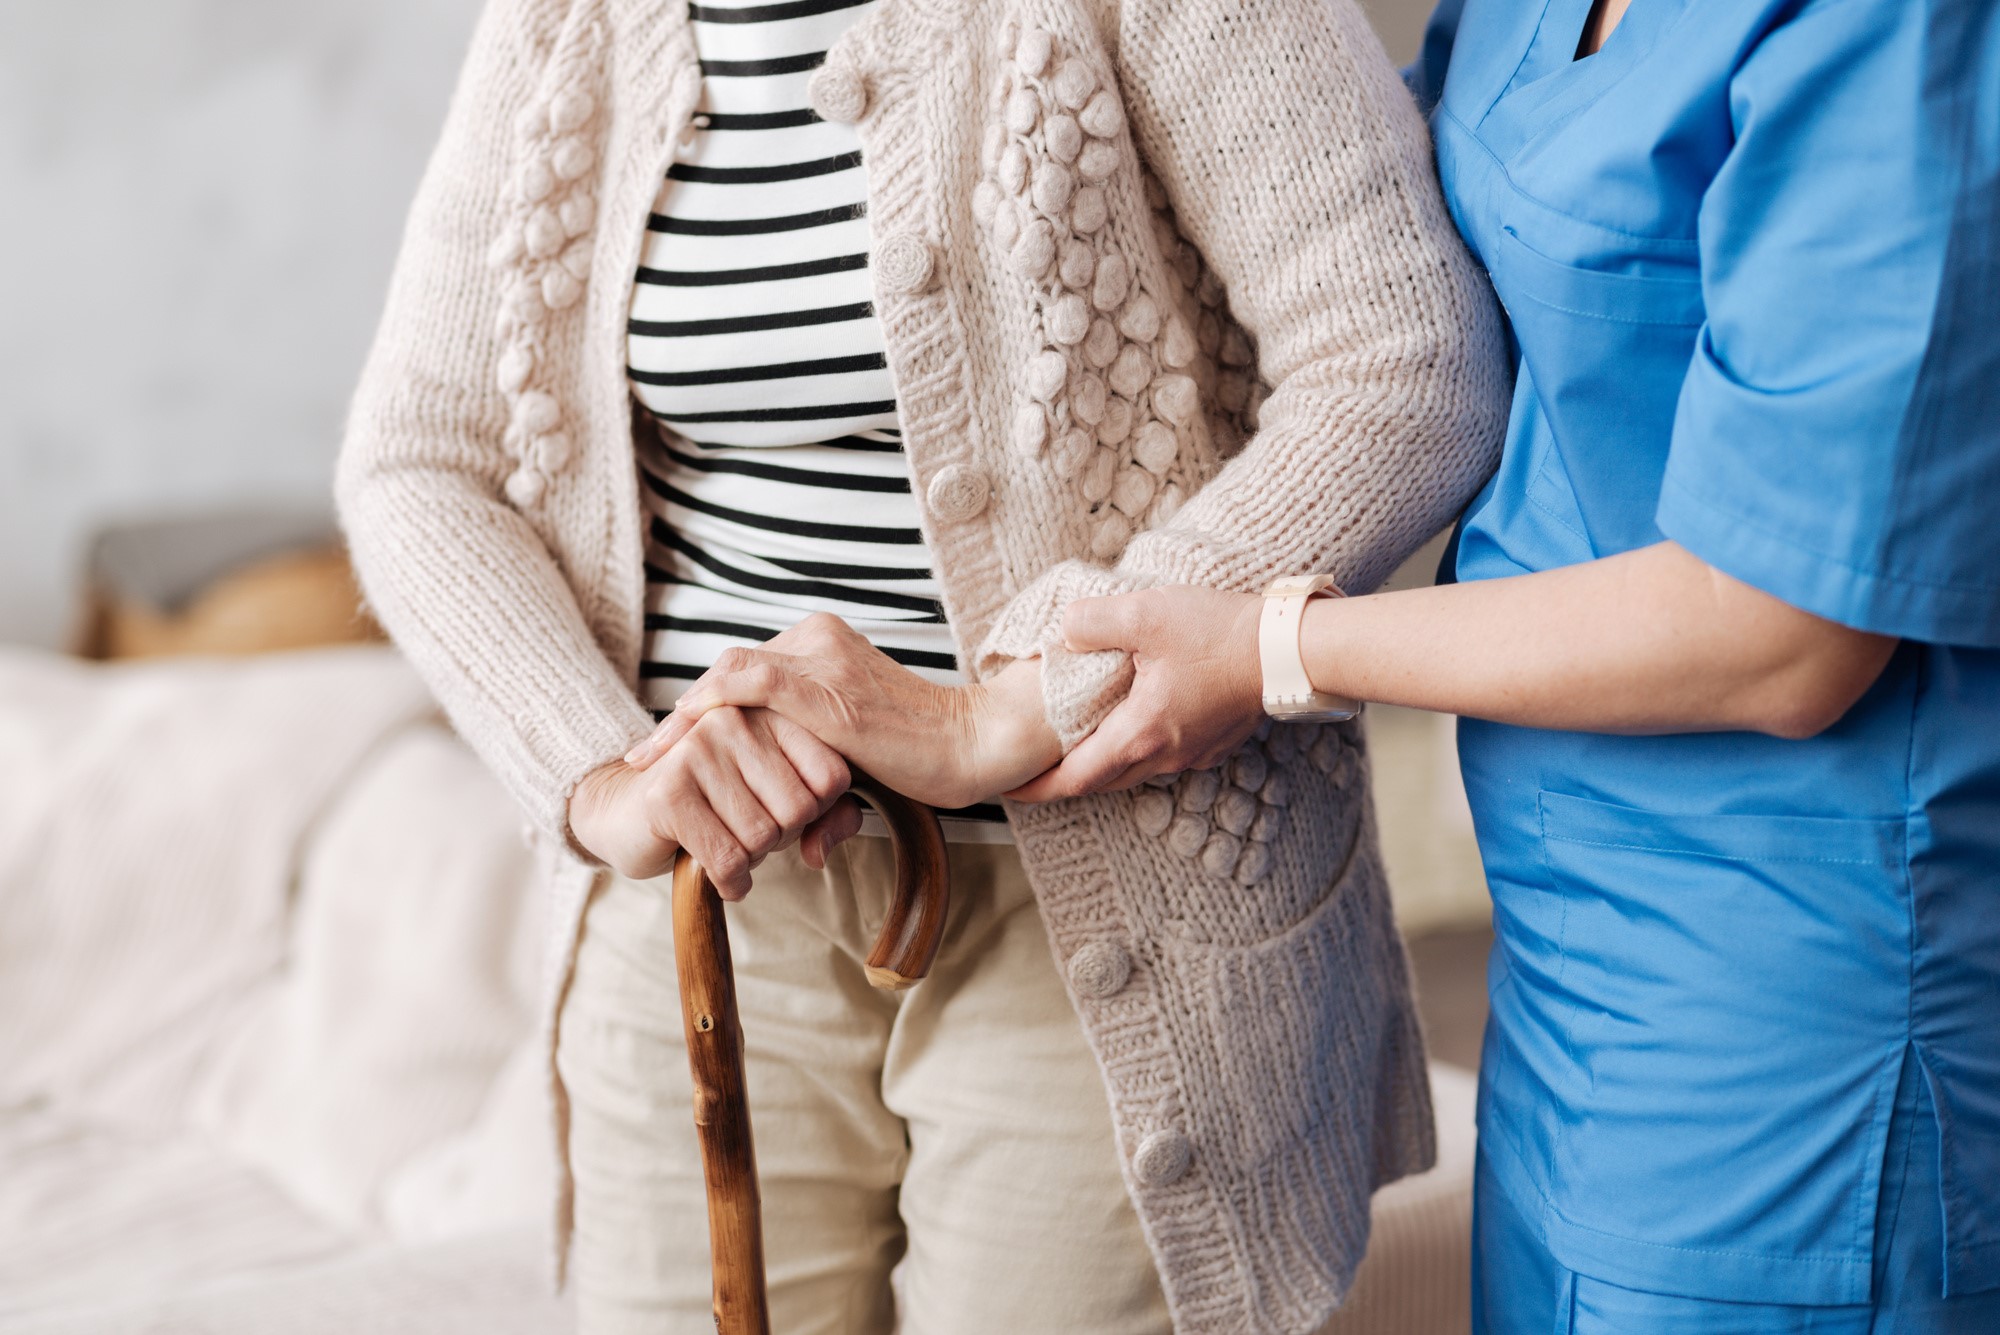 Finding the right professional to care for your senior parent at home requires knowing your options. Here is a guide on how to choose a home care provider.